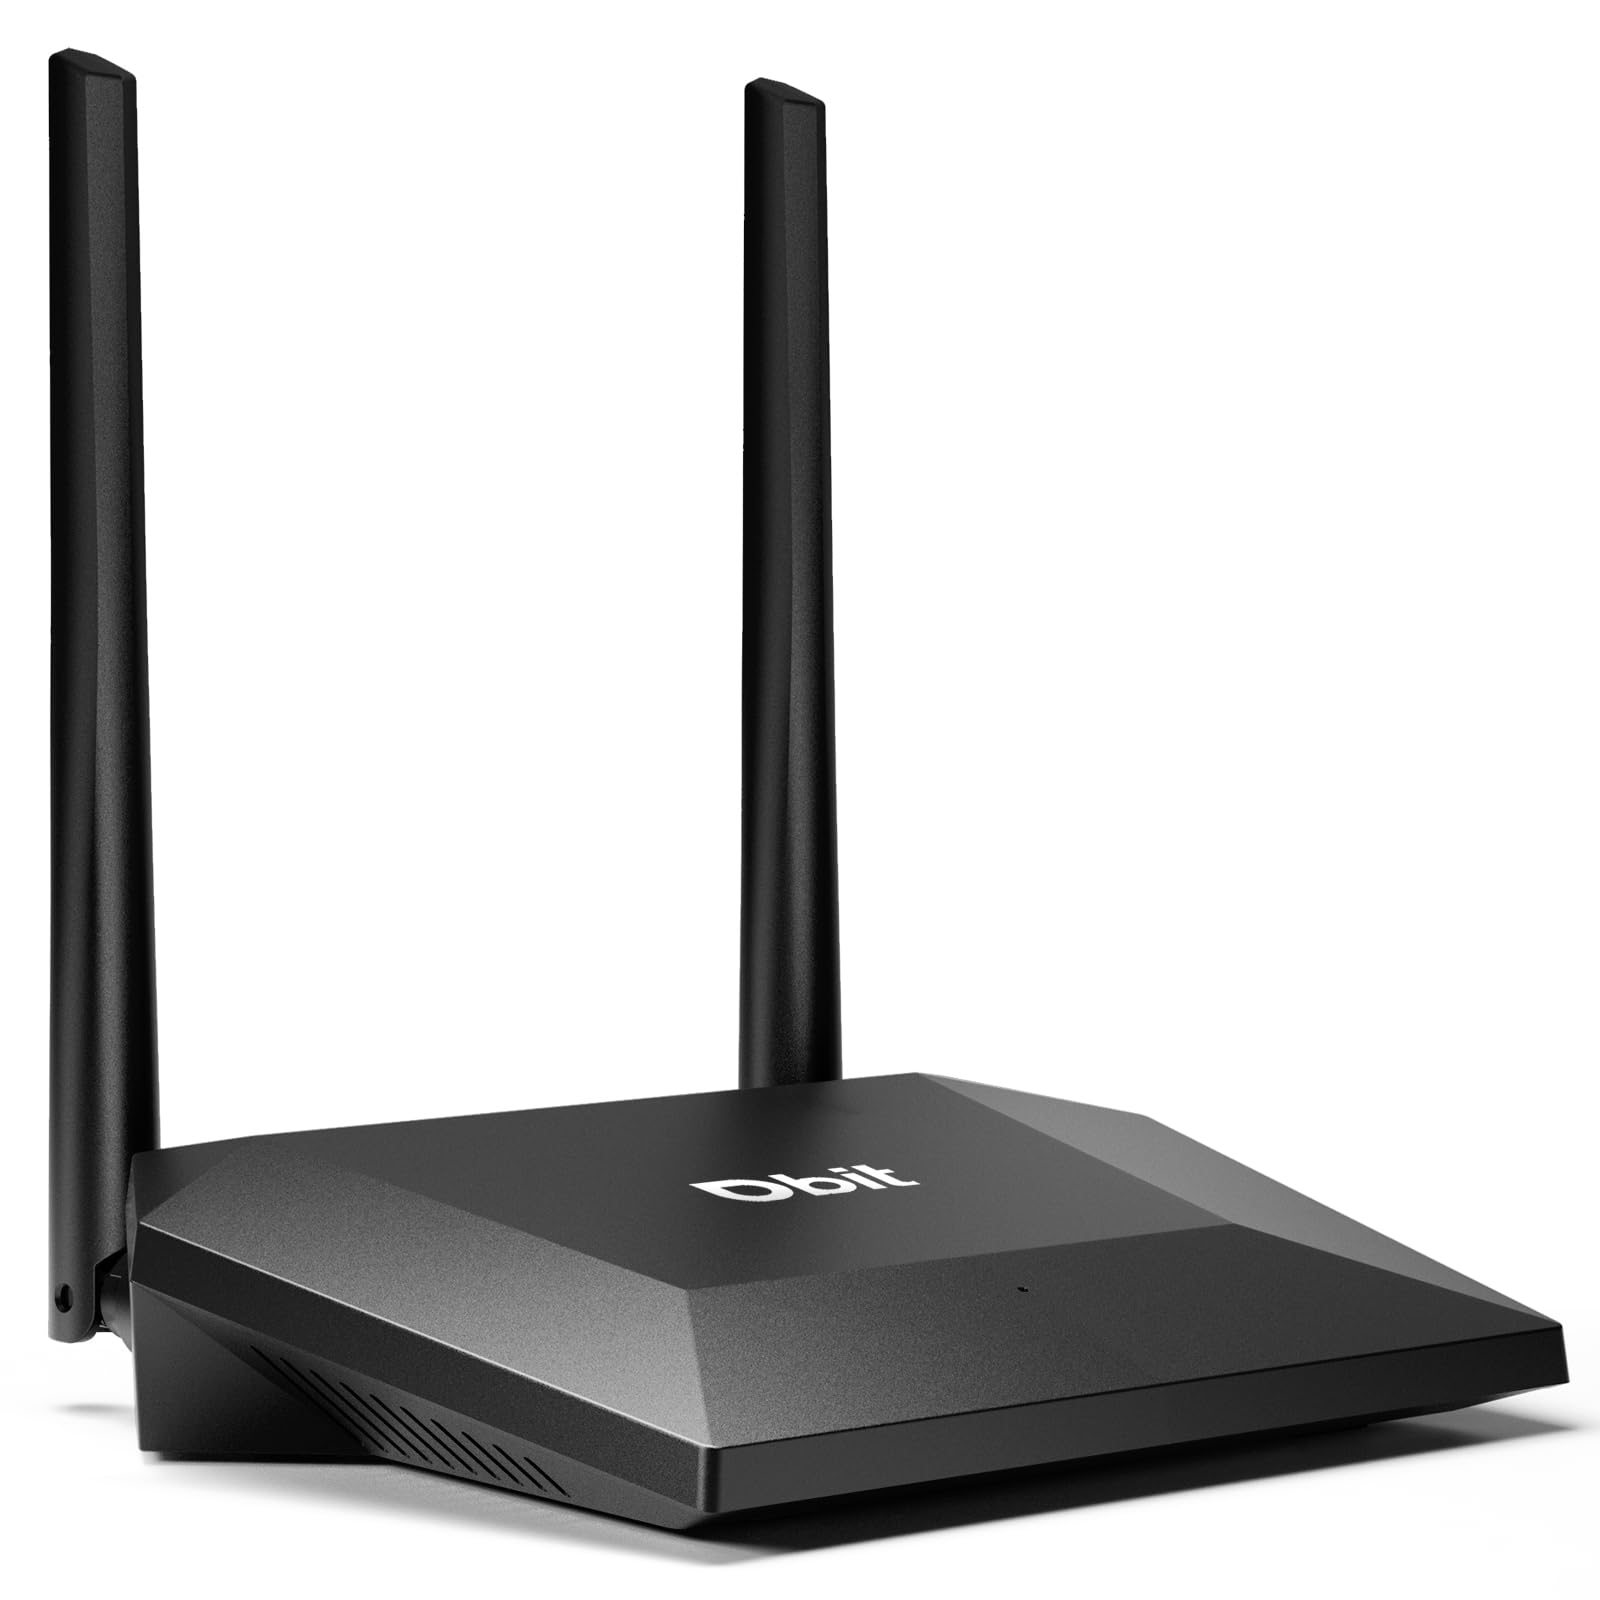 Network router setup